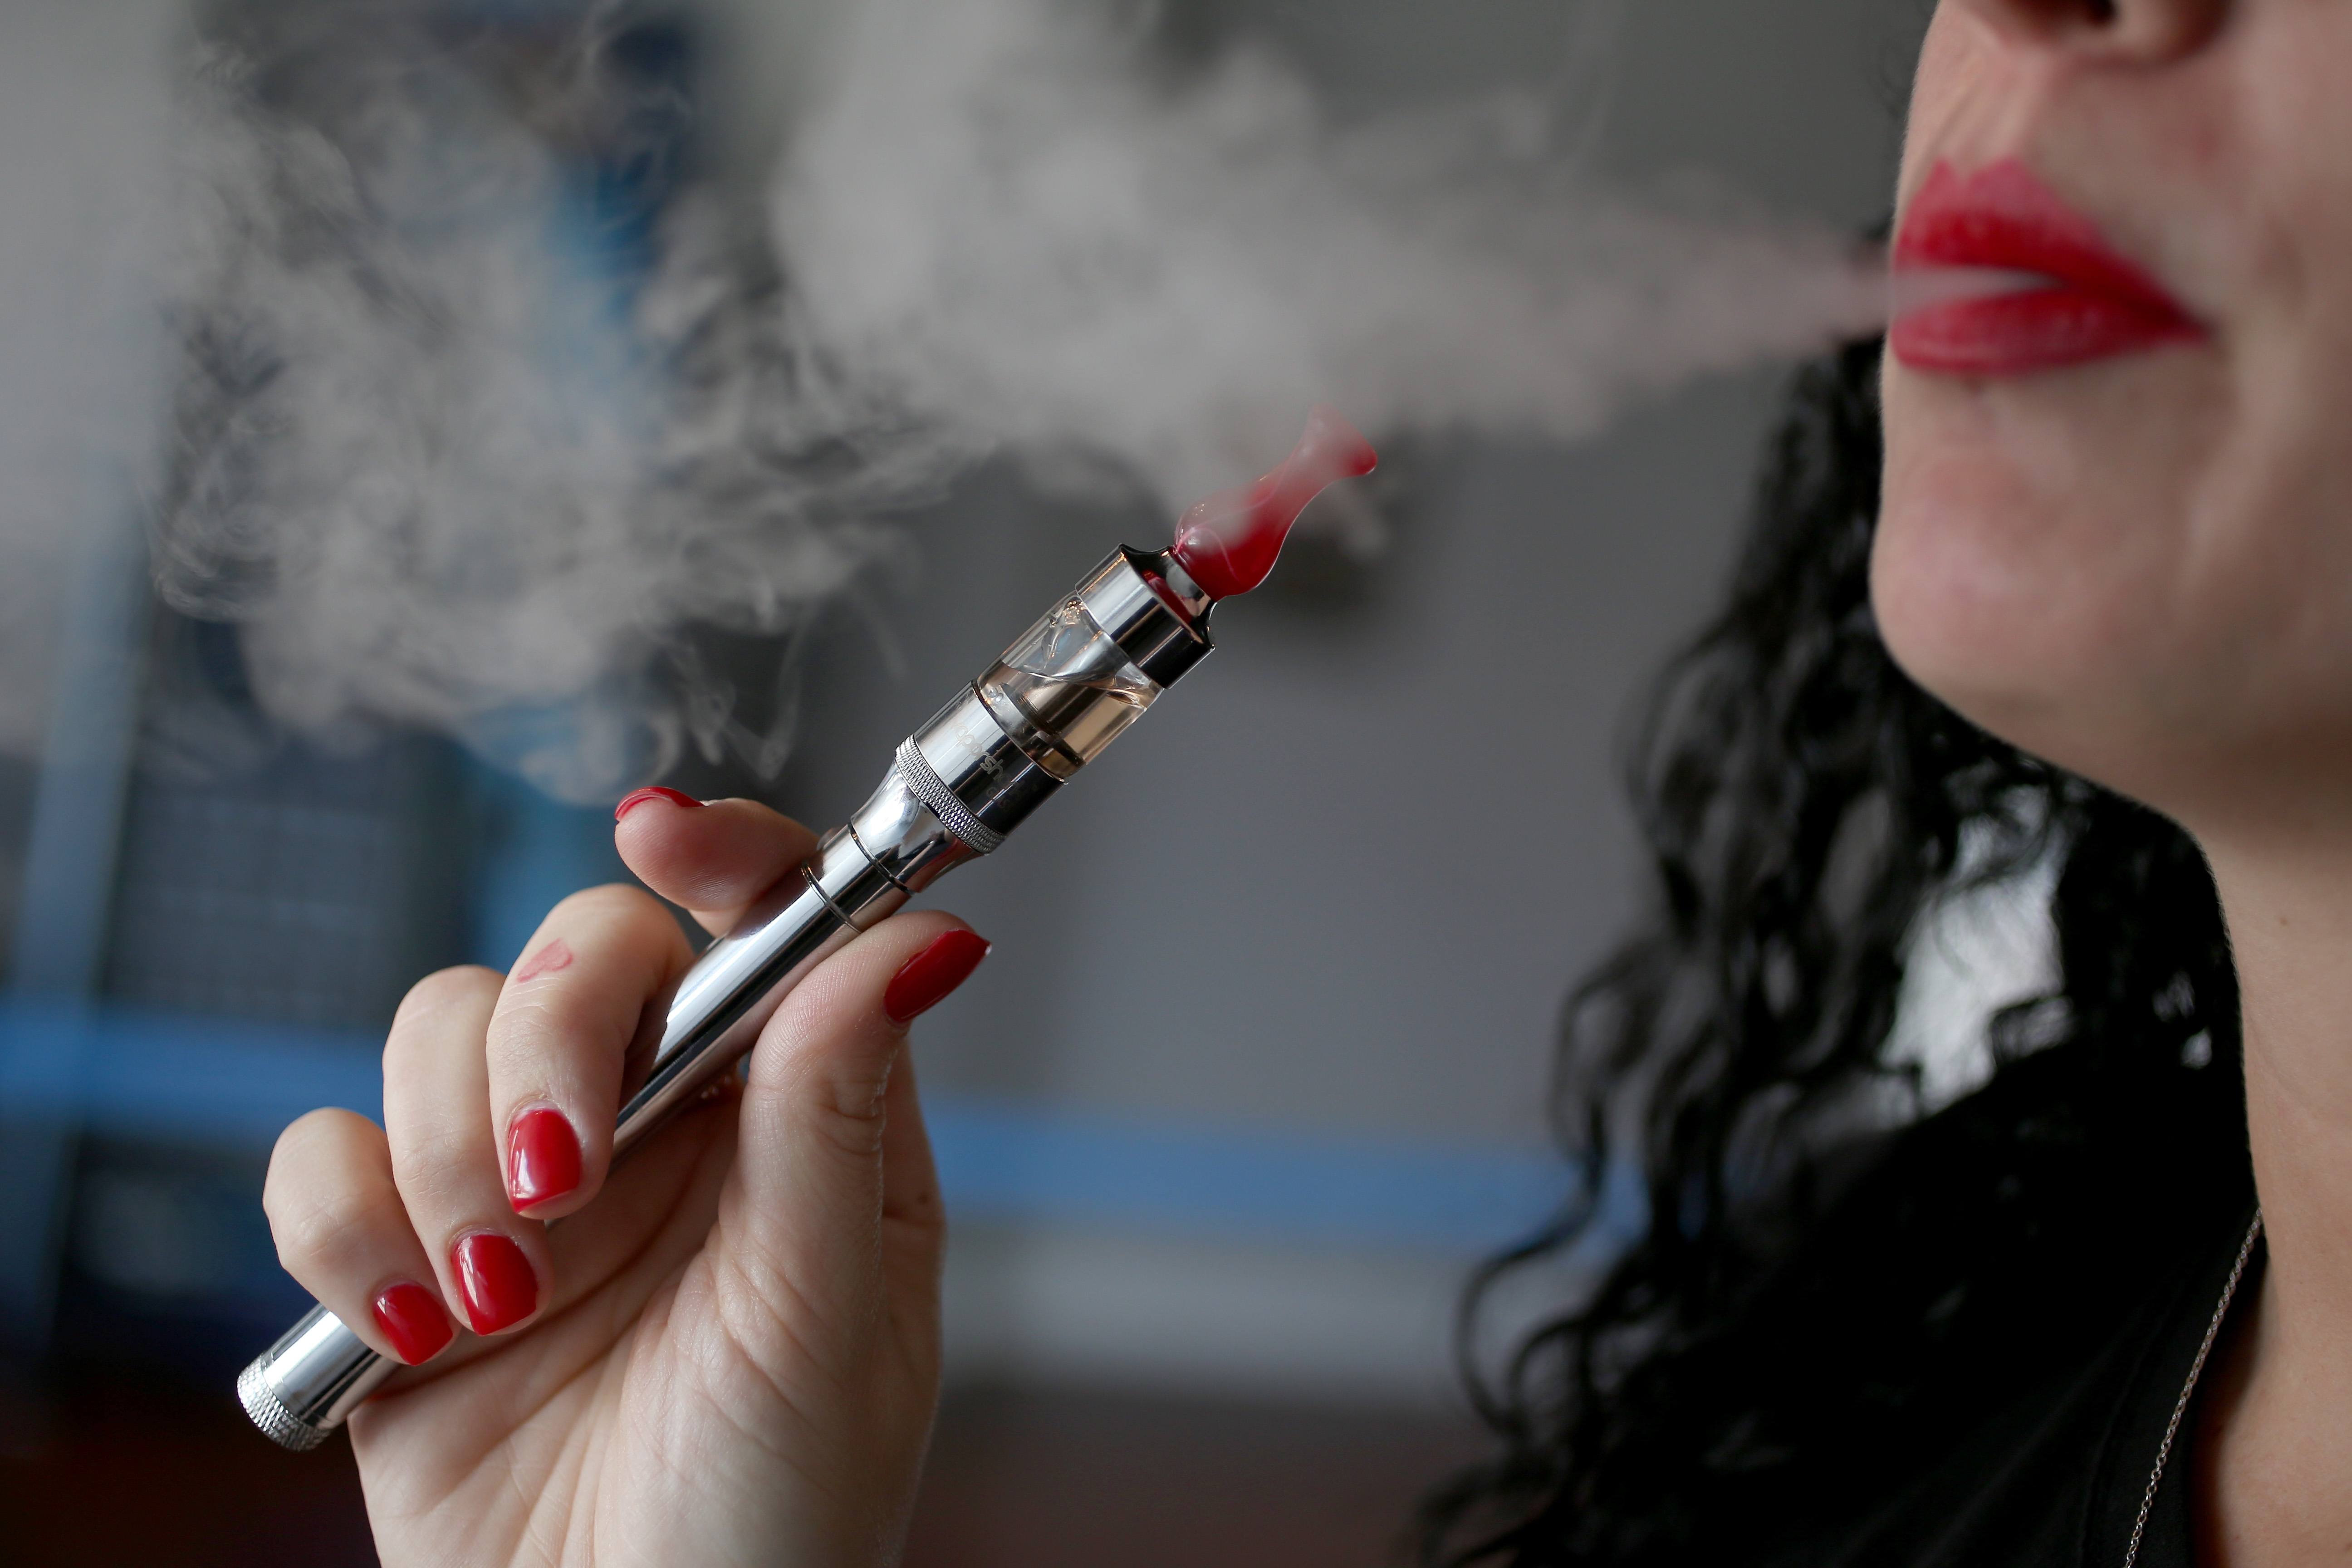 E-Cigarettes May Yellow Teeth Just as Much as Real Cigarettes: Study ...